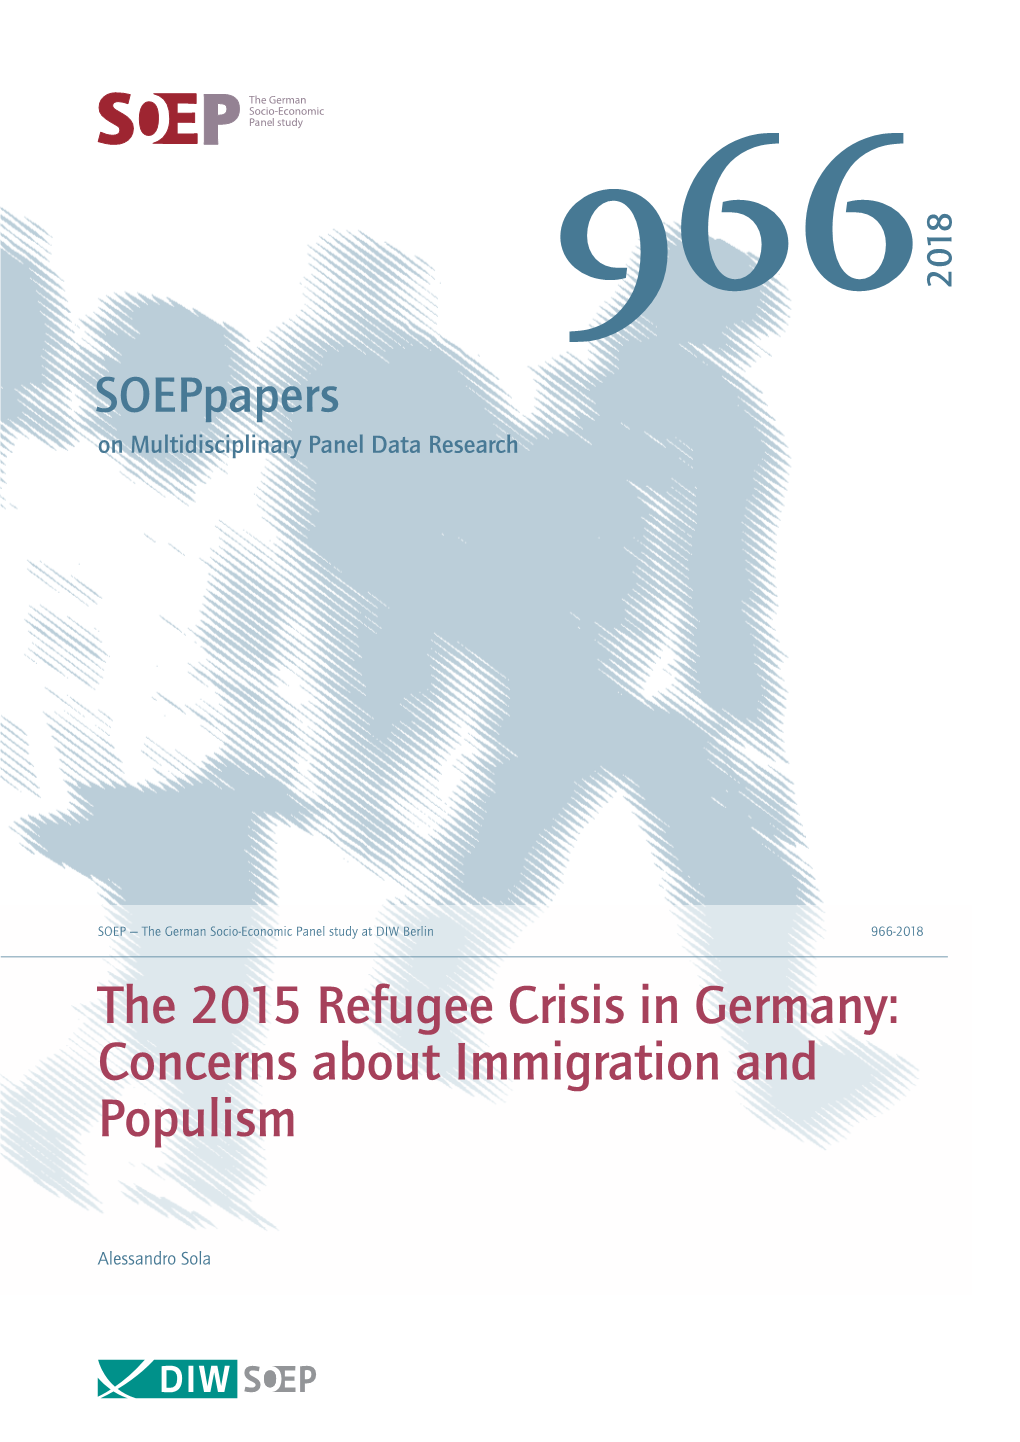 The 2015 Refugee Crisis in Germany: Concerns About Immigration and Populism